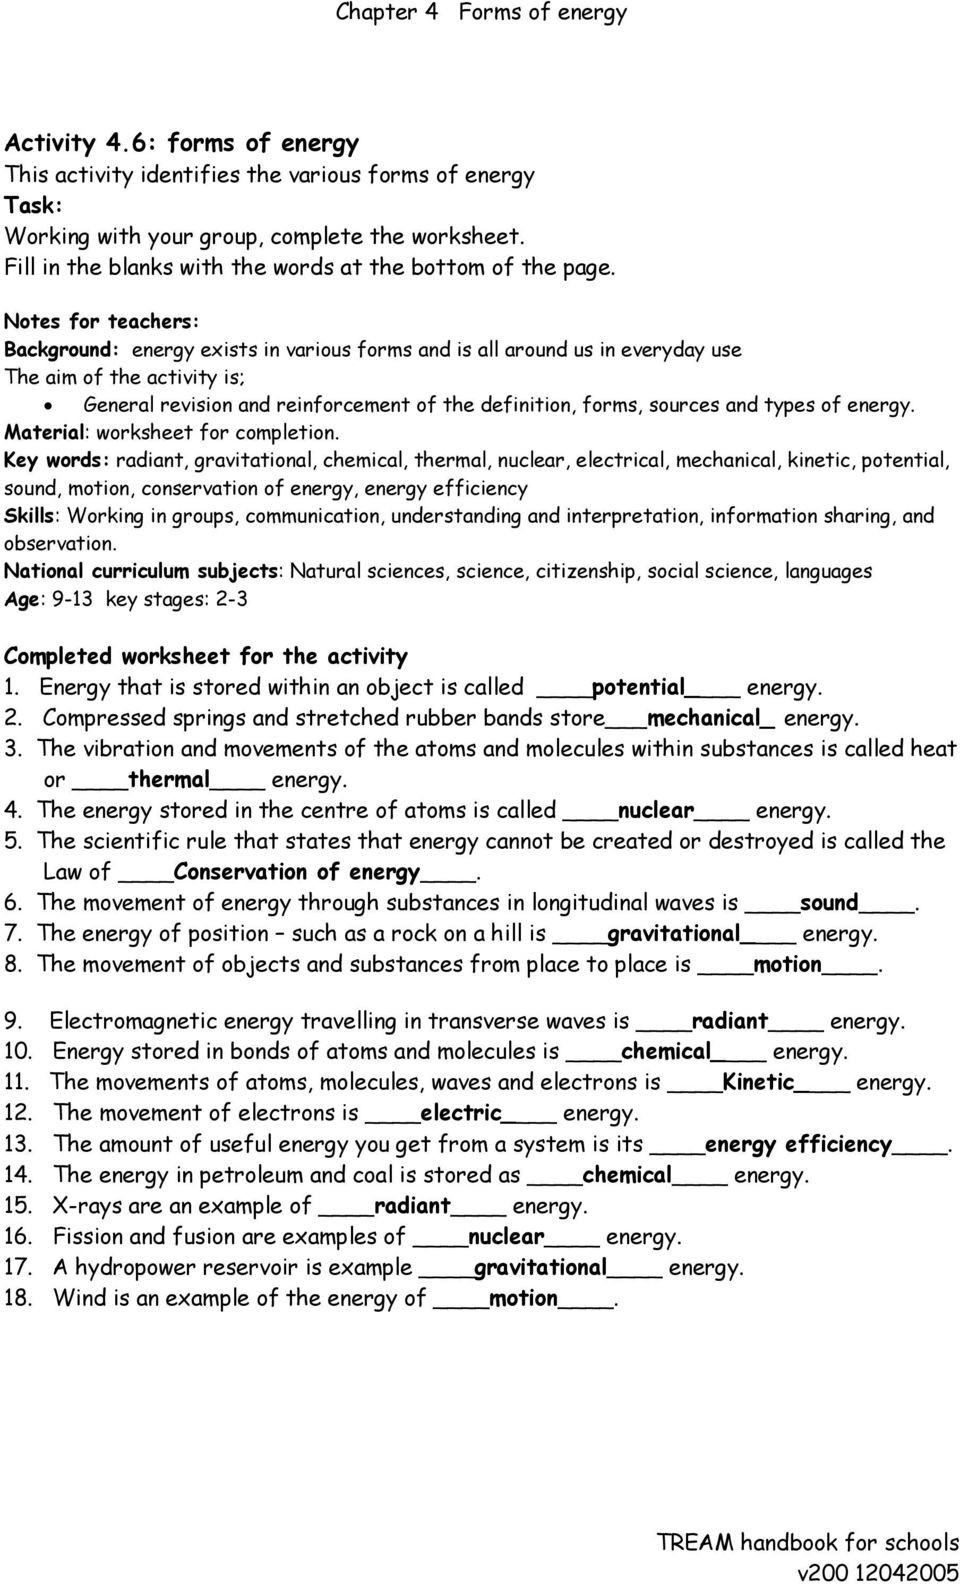 Forms Of Energy Worksheet Chapter 4 forms Of Energy Pdf Free Download